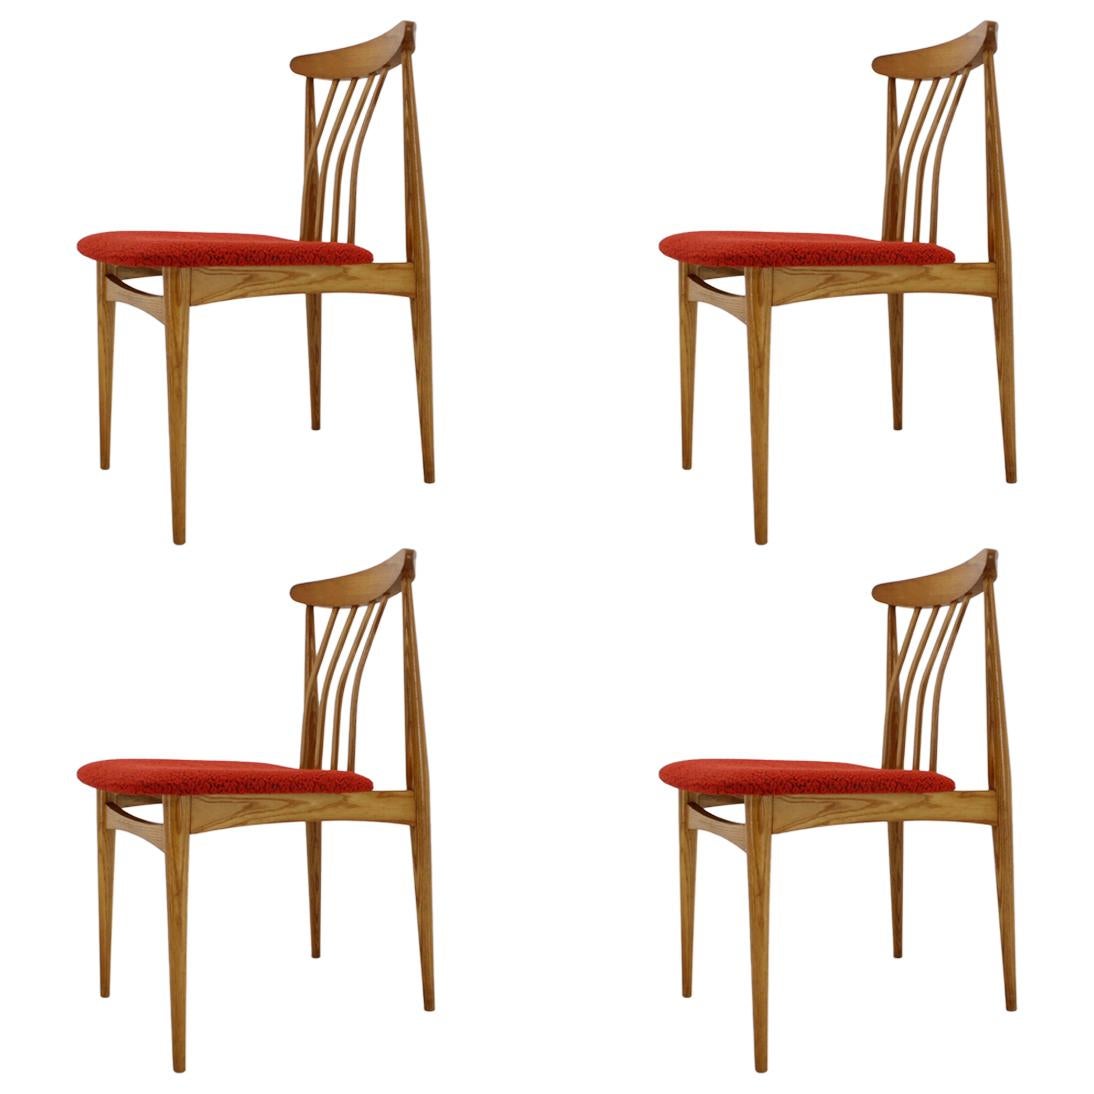 Set of four Mid century organic DESIGN Beech Dining Chairs - 1960s